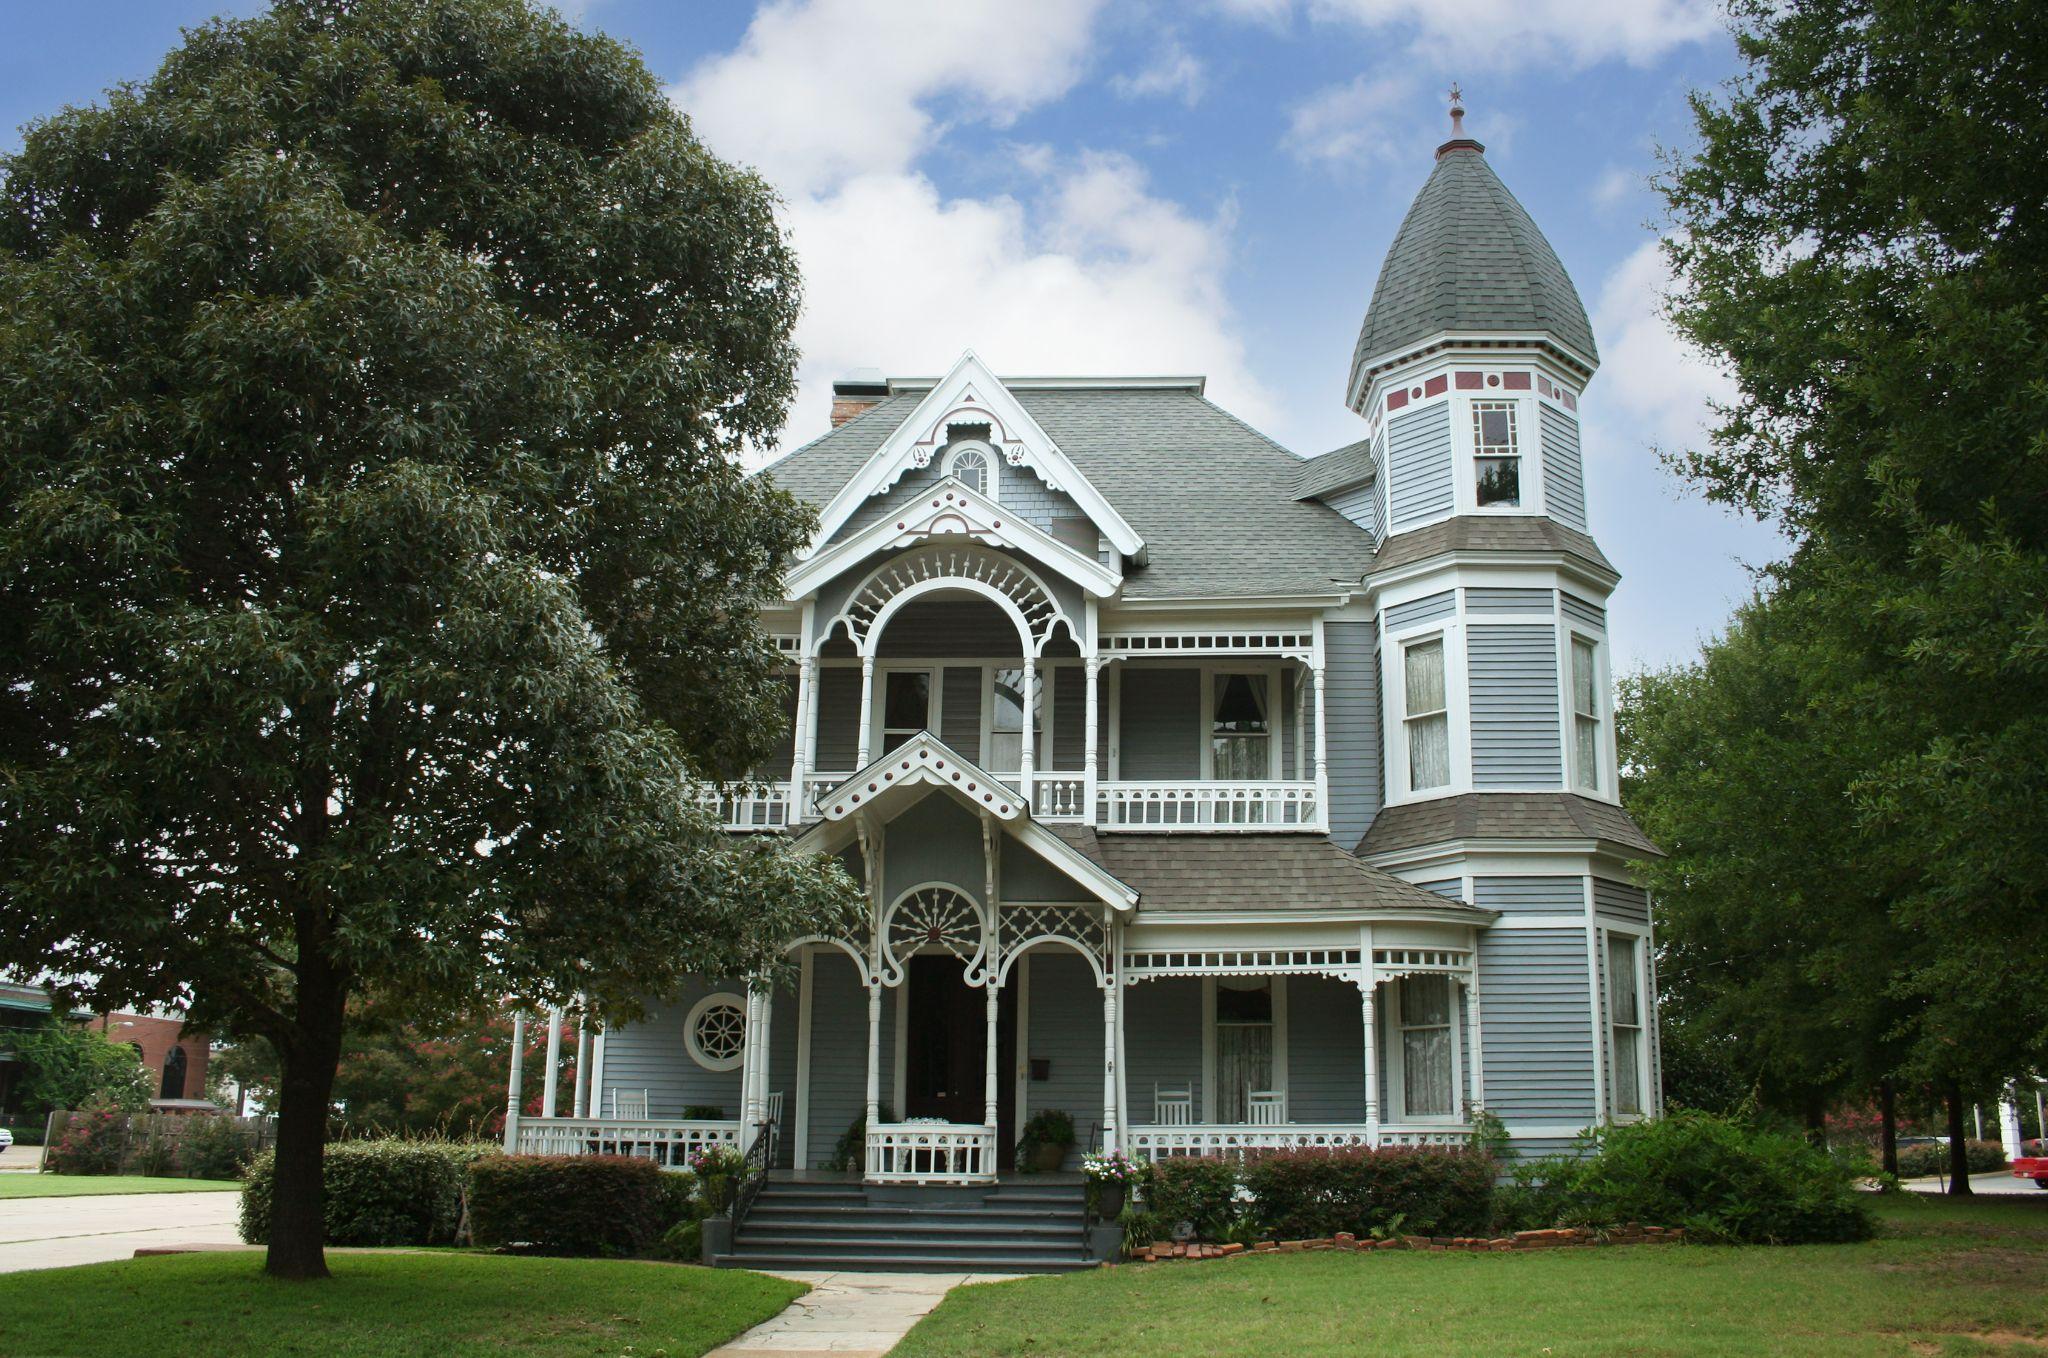 Victorian house with trees and blue sky nacogdoches texas